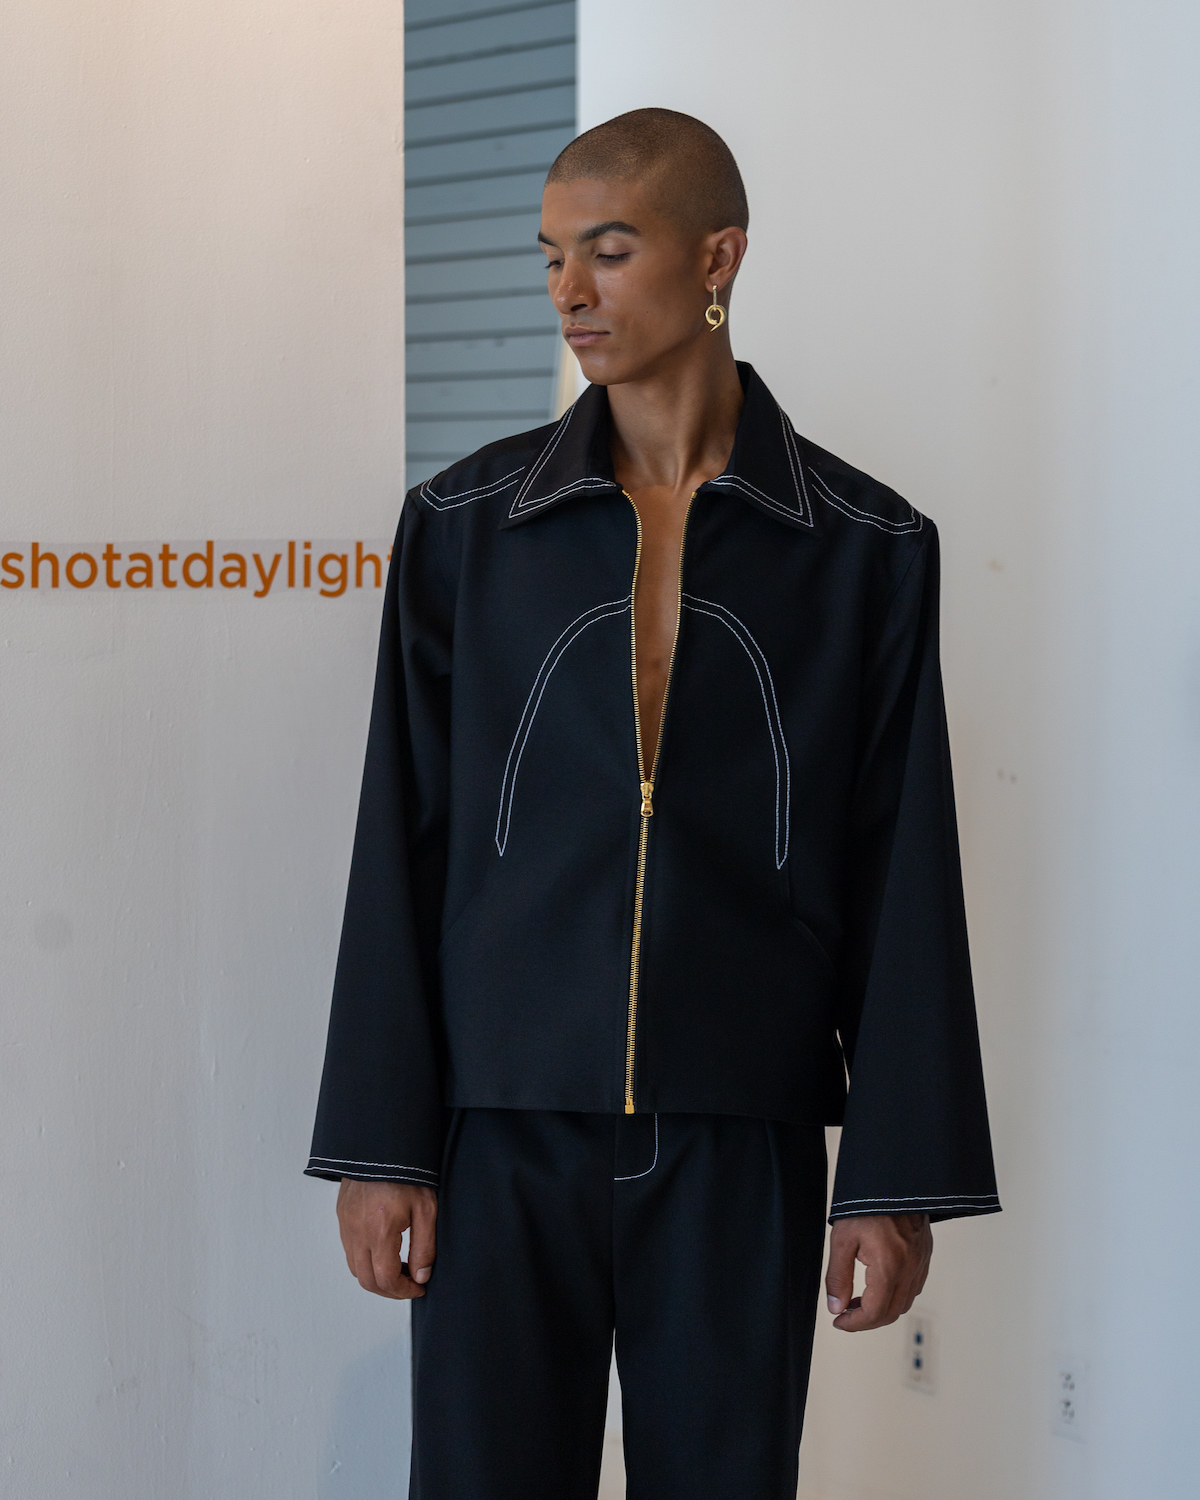 A model wearing a black jacket with gold hardware looks down. The model is wearing clothes from KENT ANTHONY.